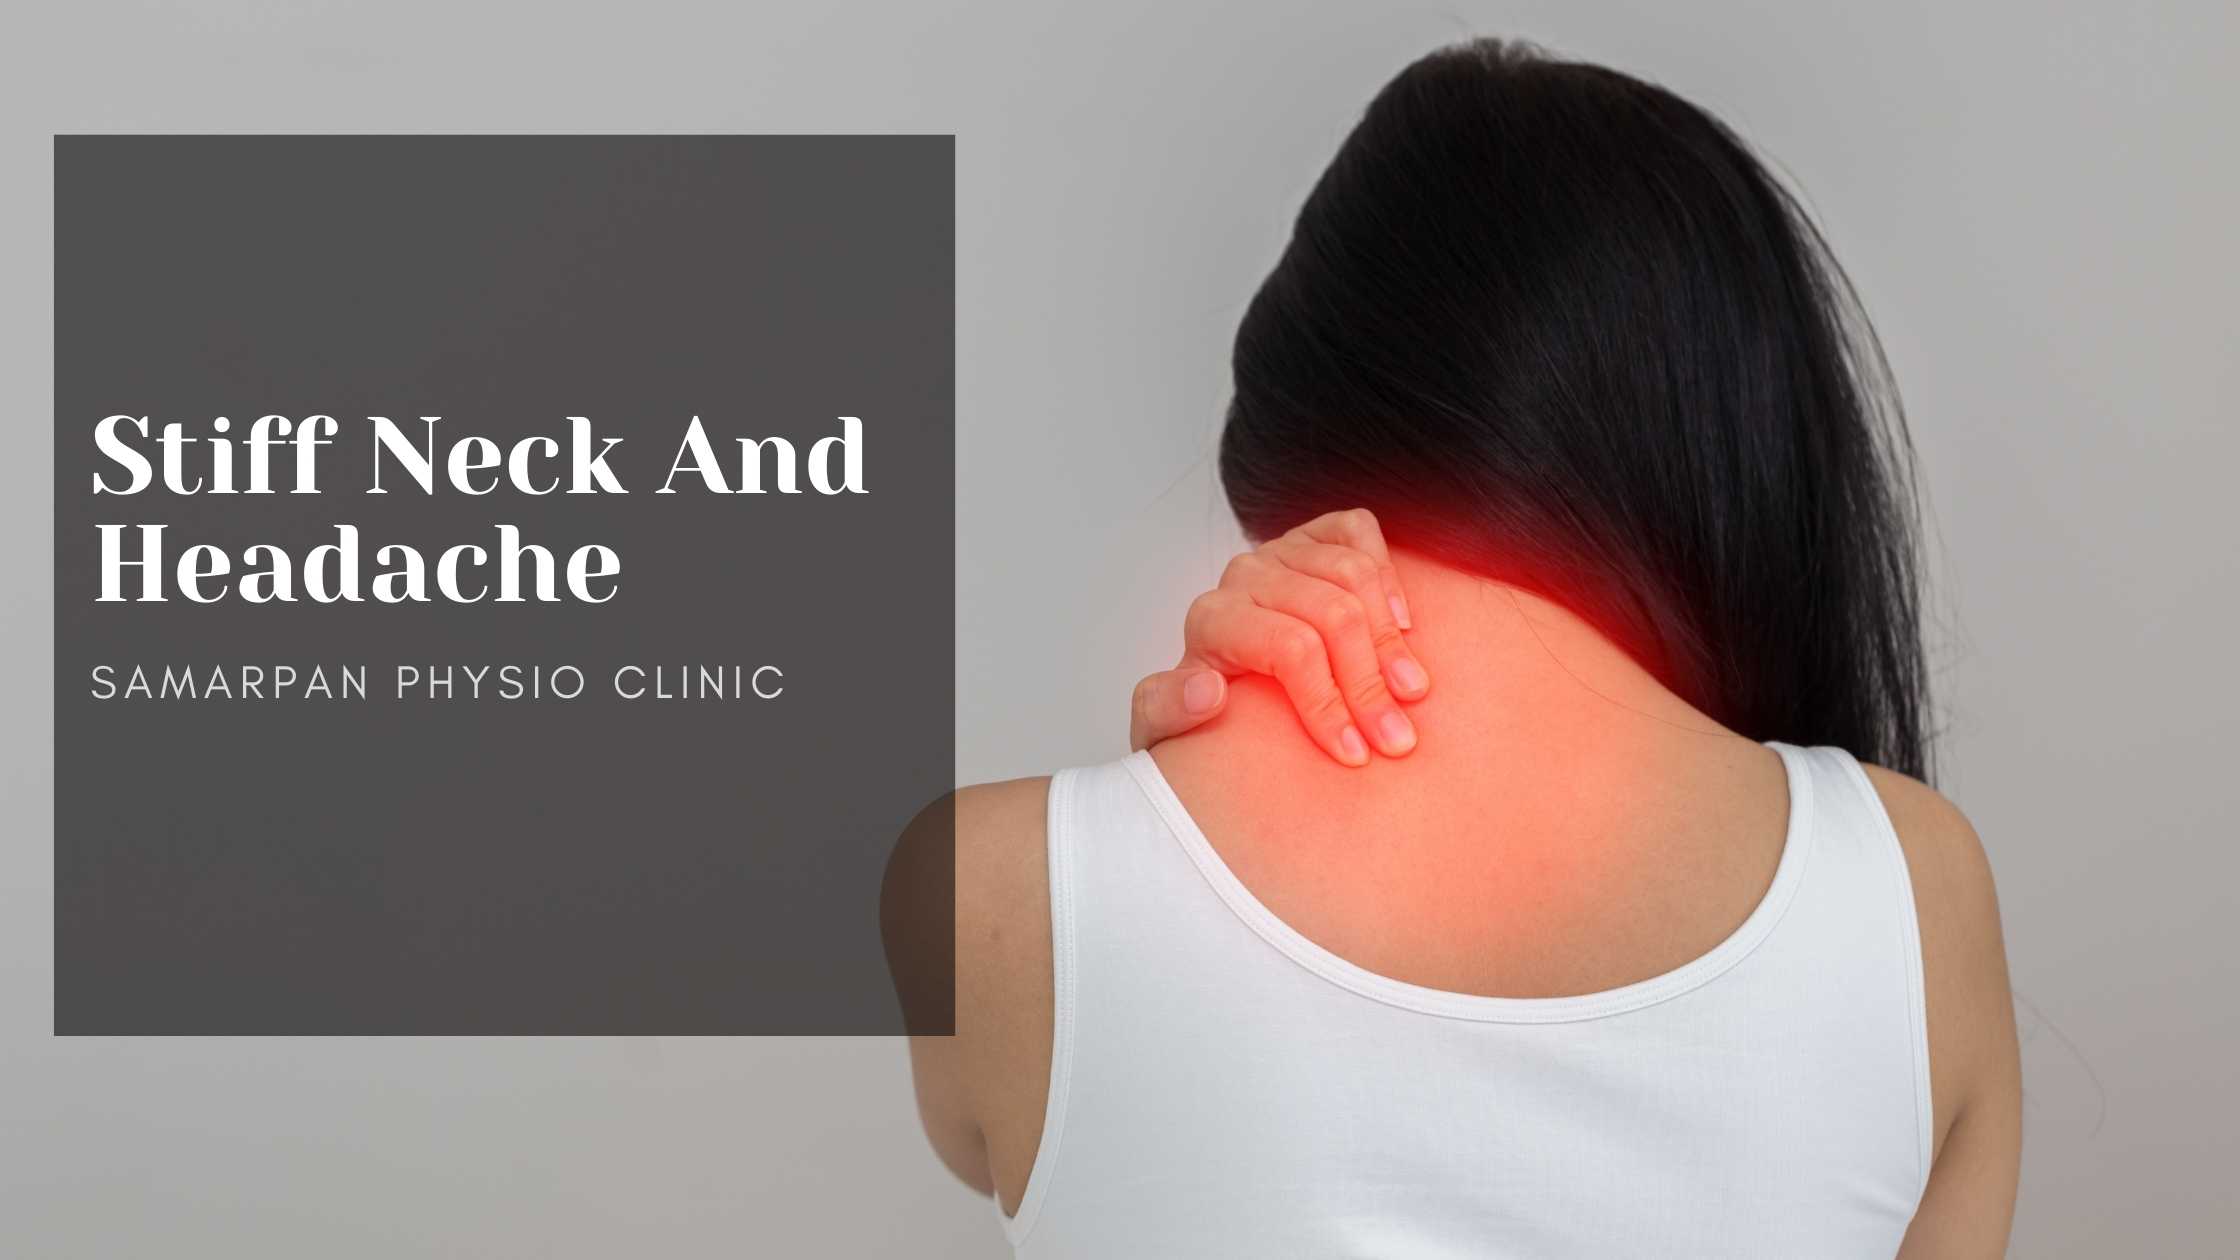 is commonly named together as in some cases Neck Pain can cause Headache, D...